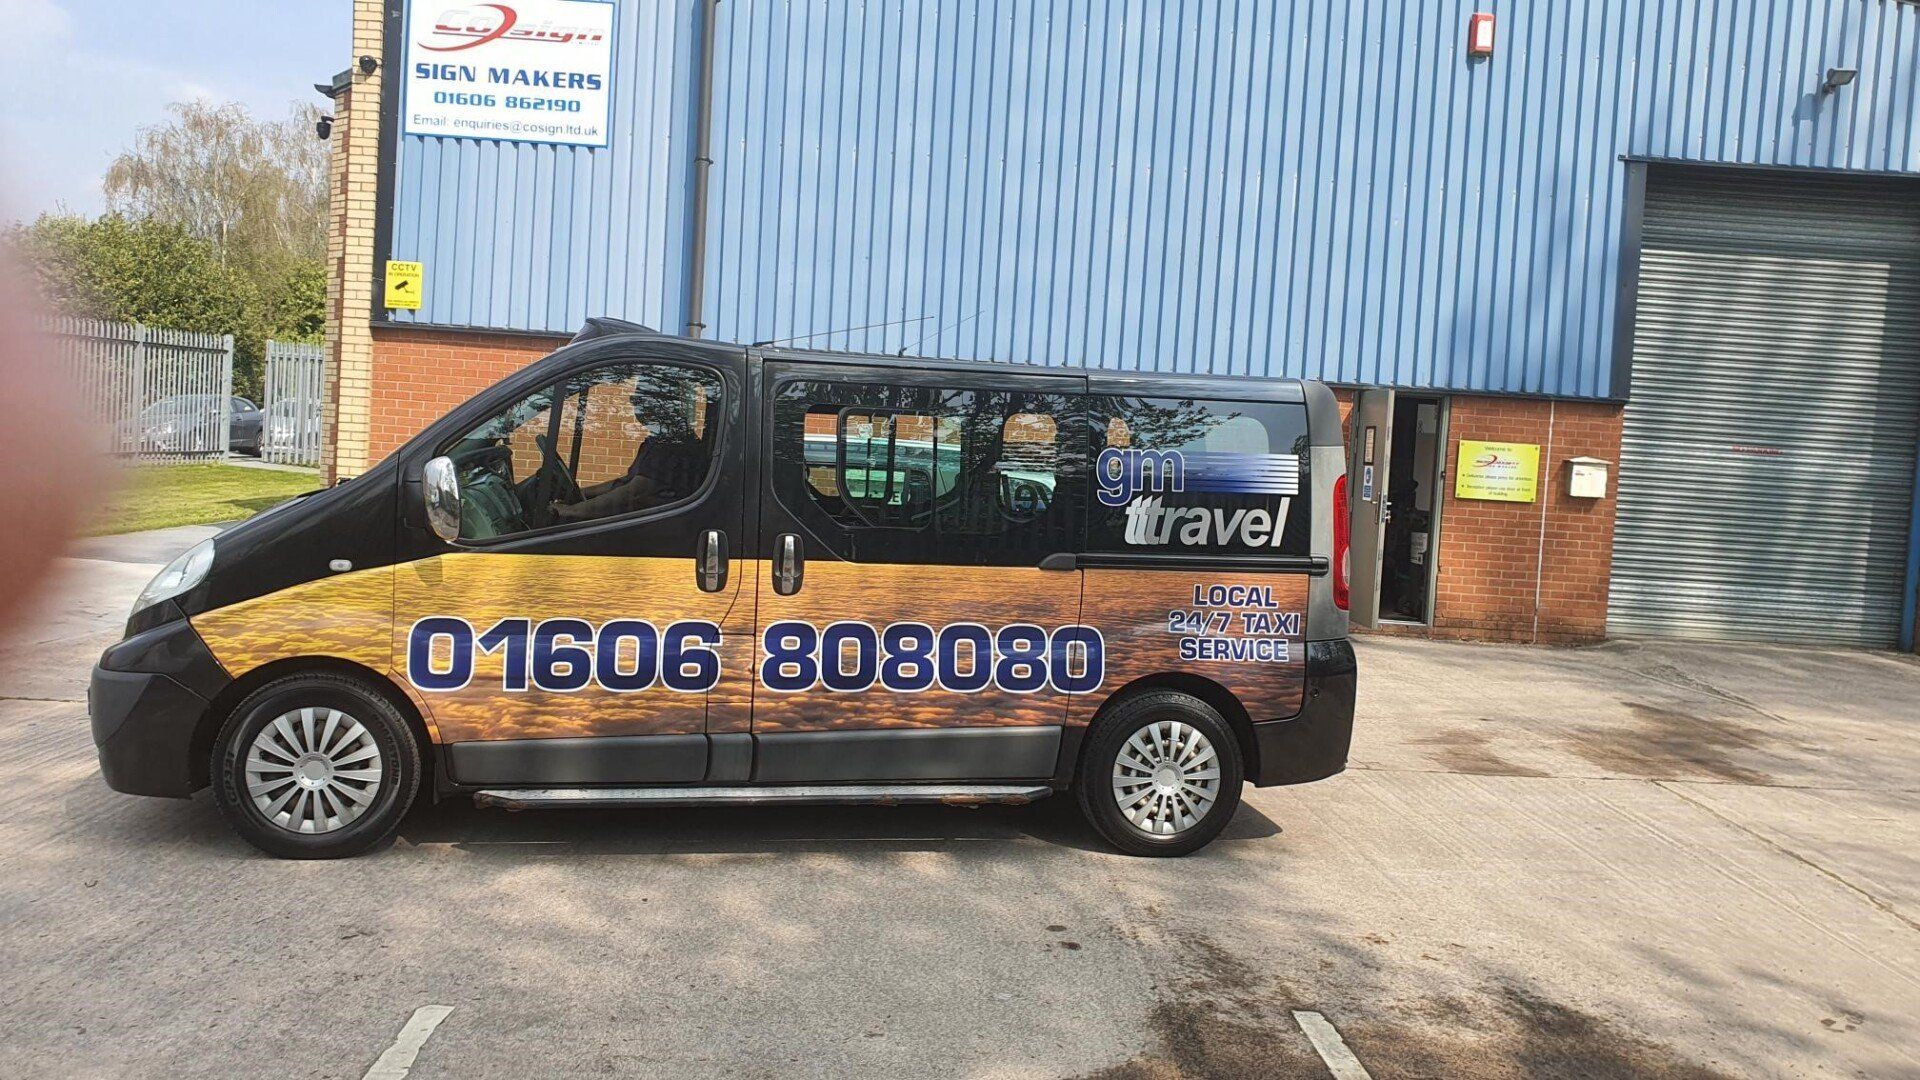 gm travel (winsford number)